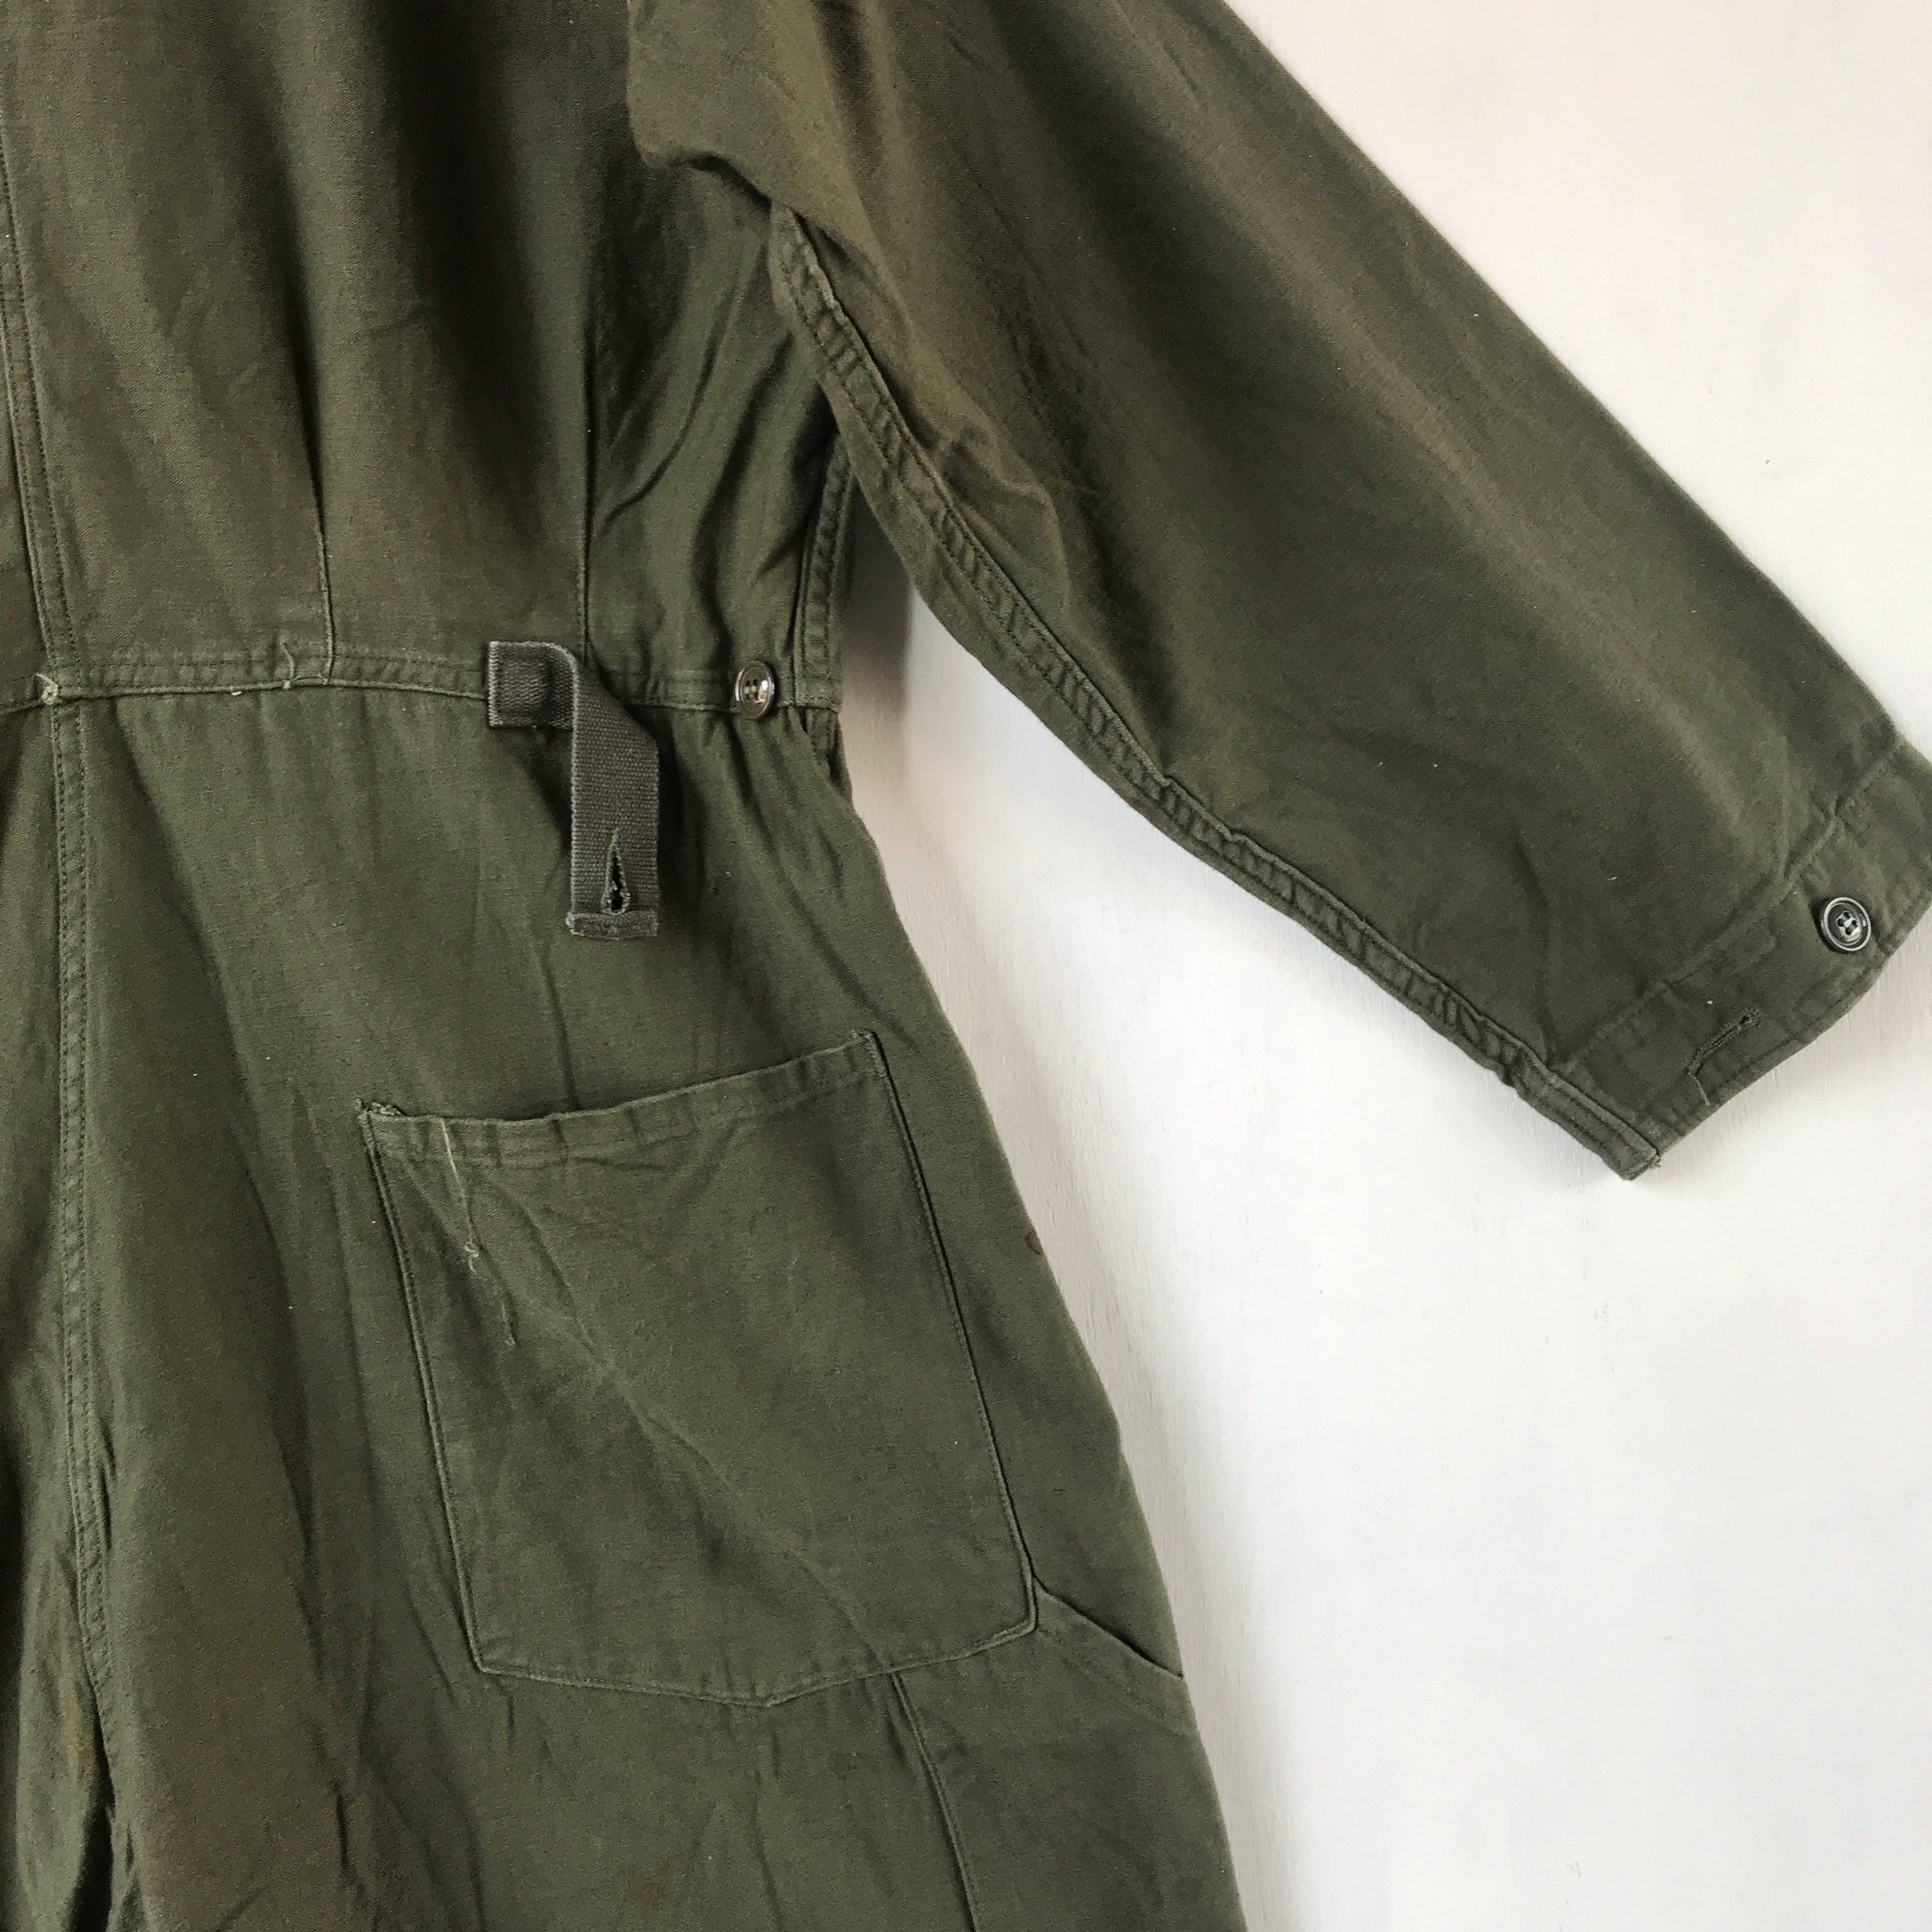 [ ONLY ONE ! ] US ARMED FORCES '83 COVERALLS / U.S.MILITARY